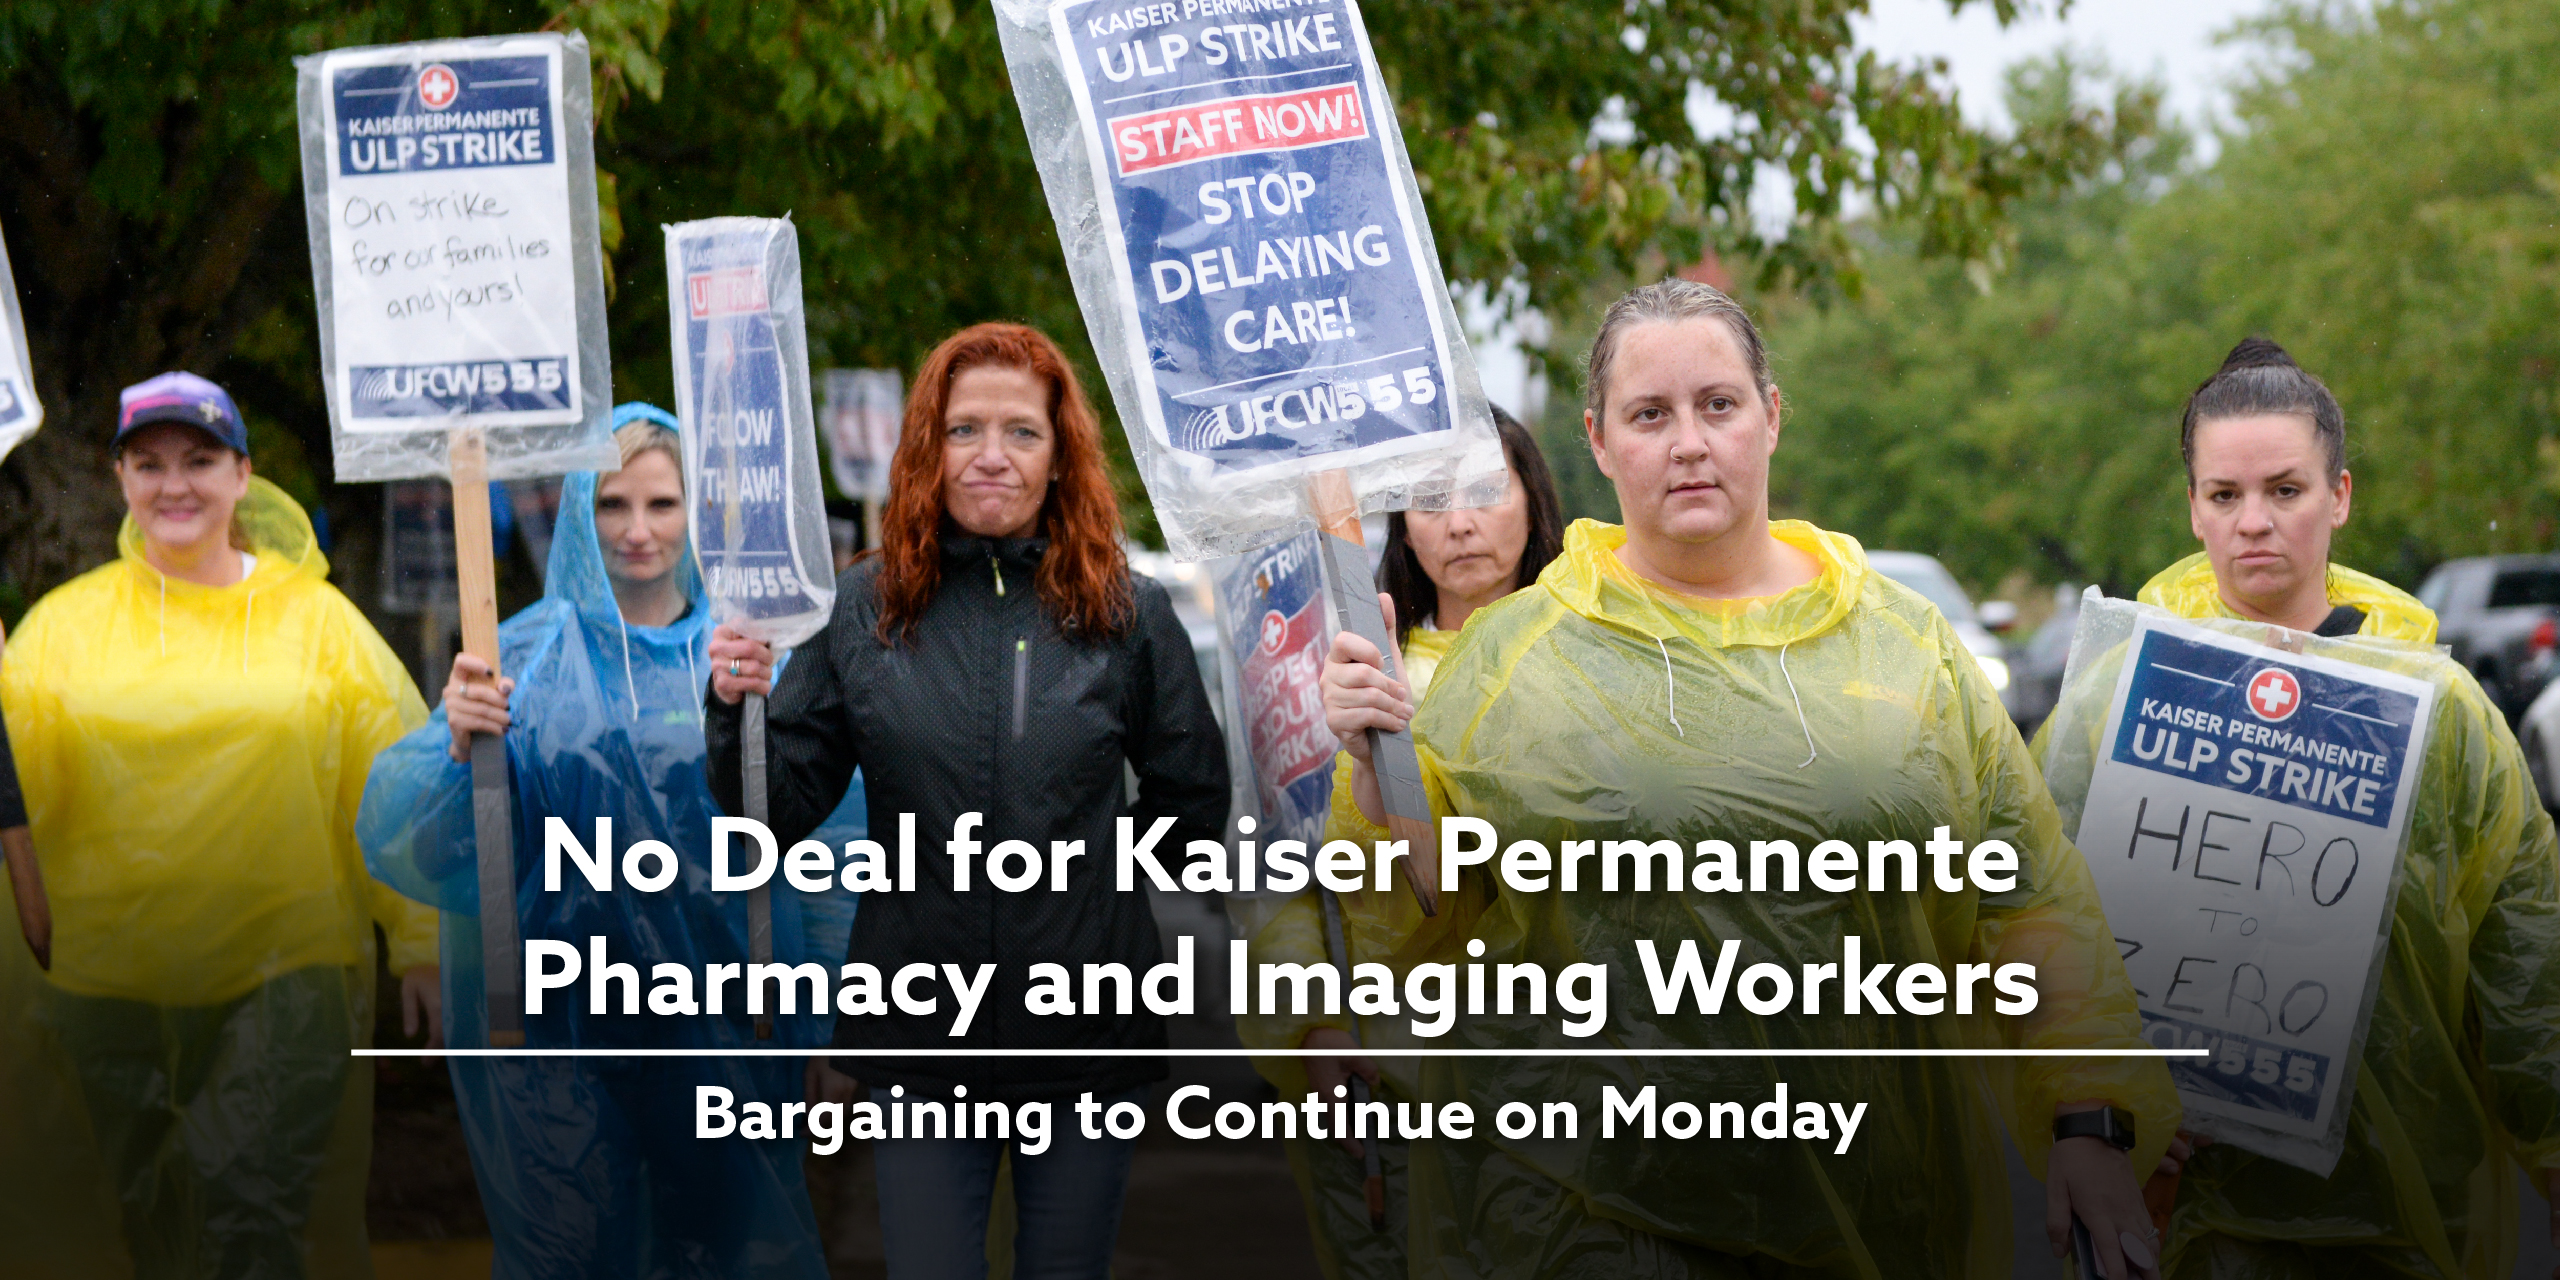 No deal for Kaiser Permanente Pharmacy and Imaging workers. Bargaining to continue on Monday